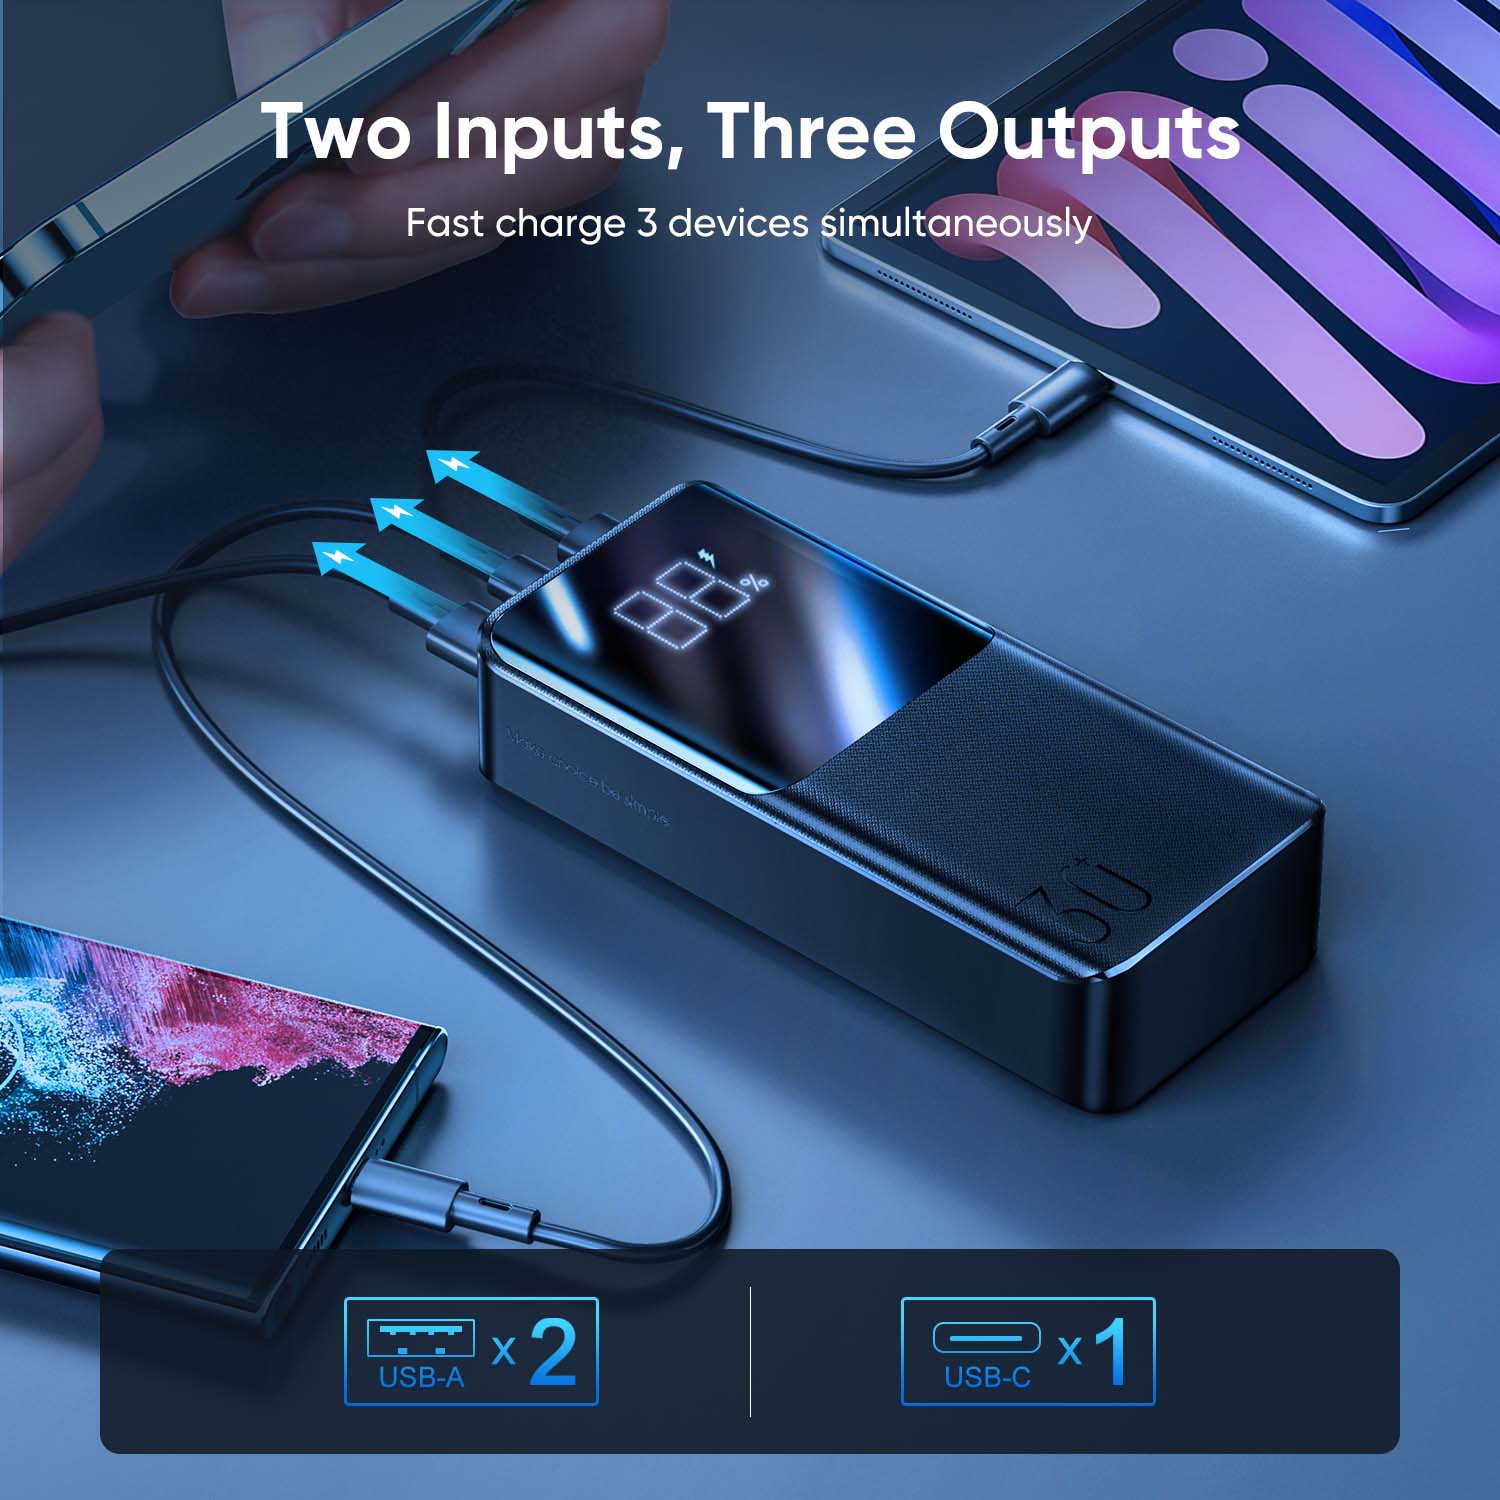 2 inputs, 3 outputs. Fast charge 3 devices simultaneously